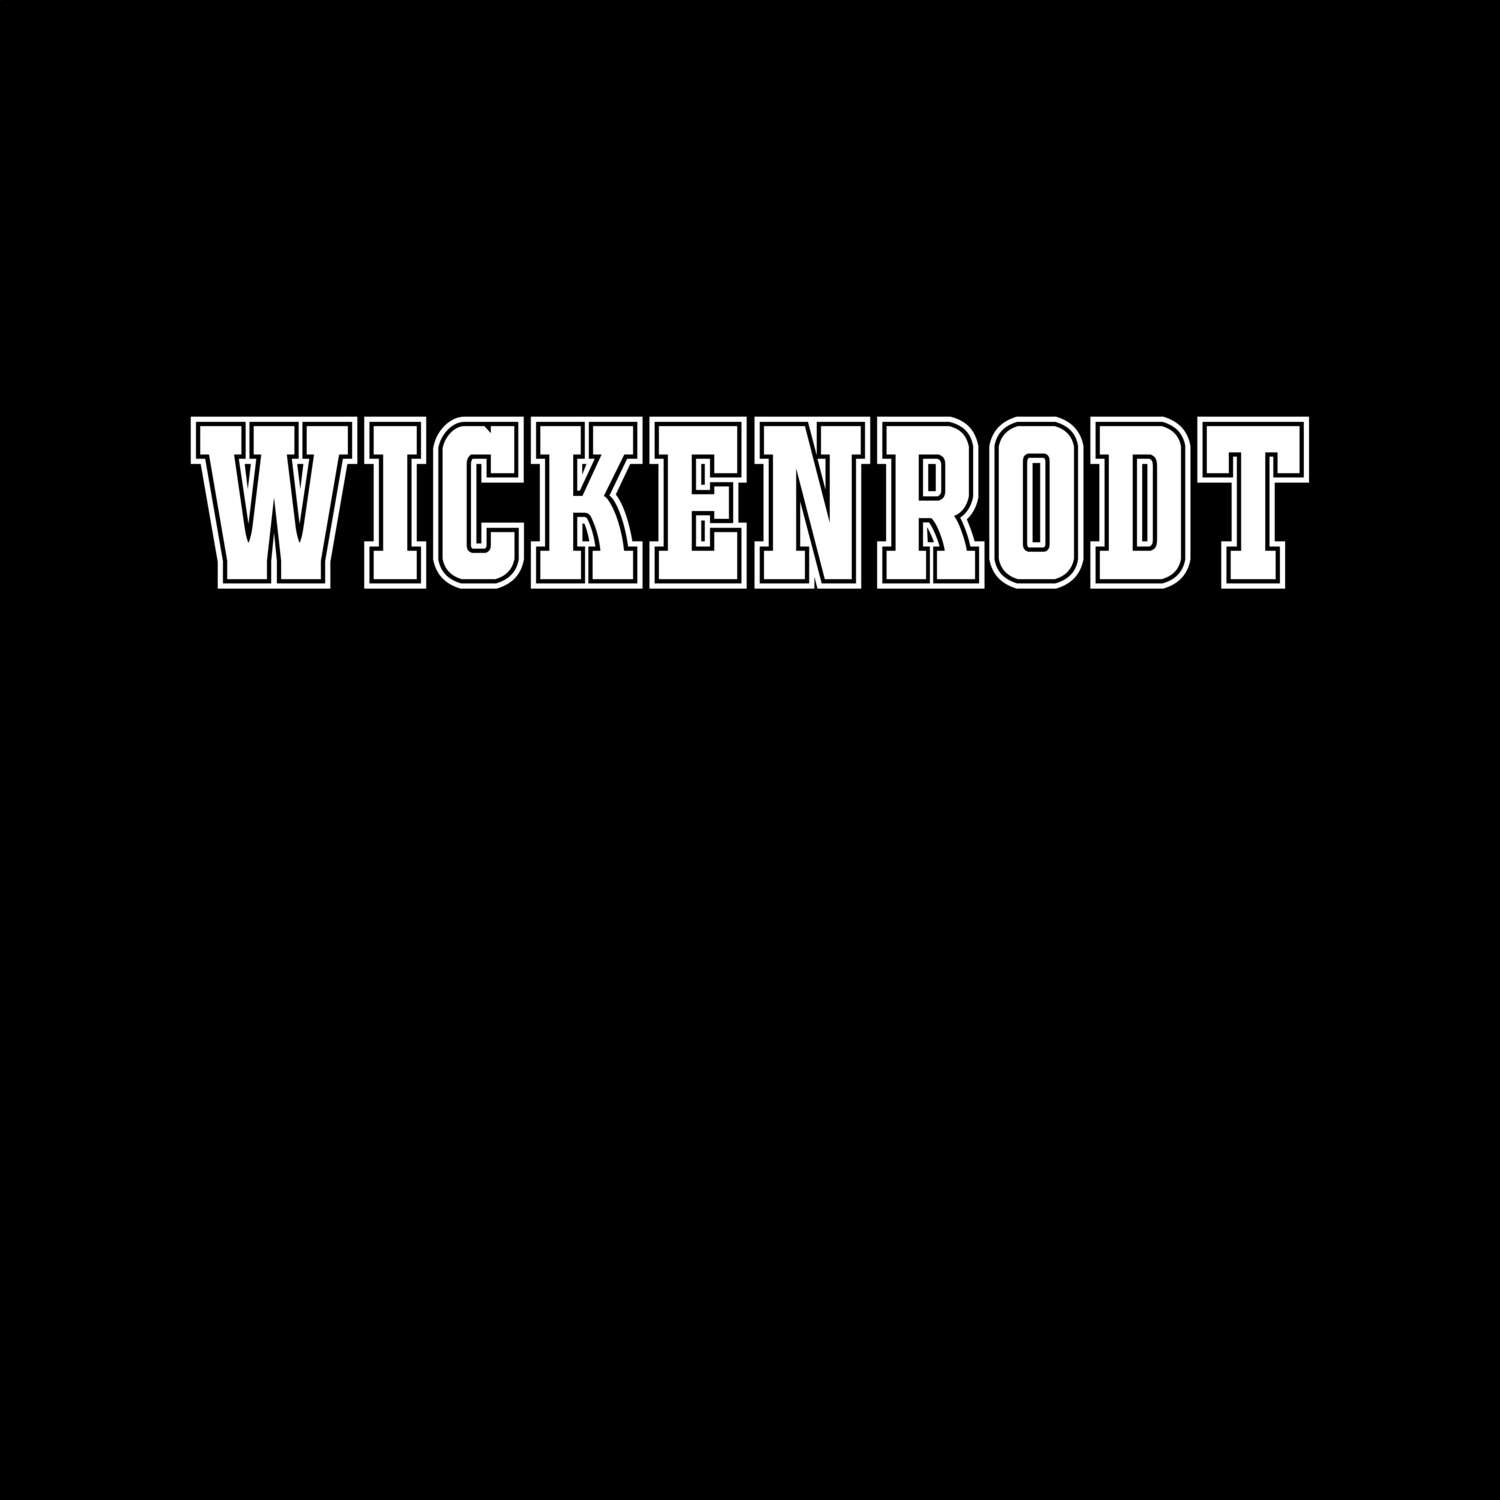 Wickenrodt T-Shirt »Classic«